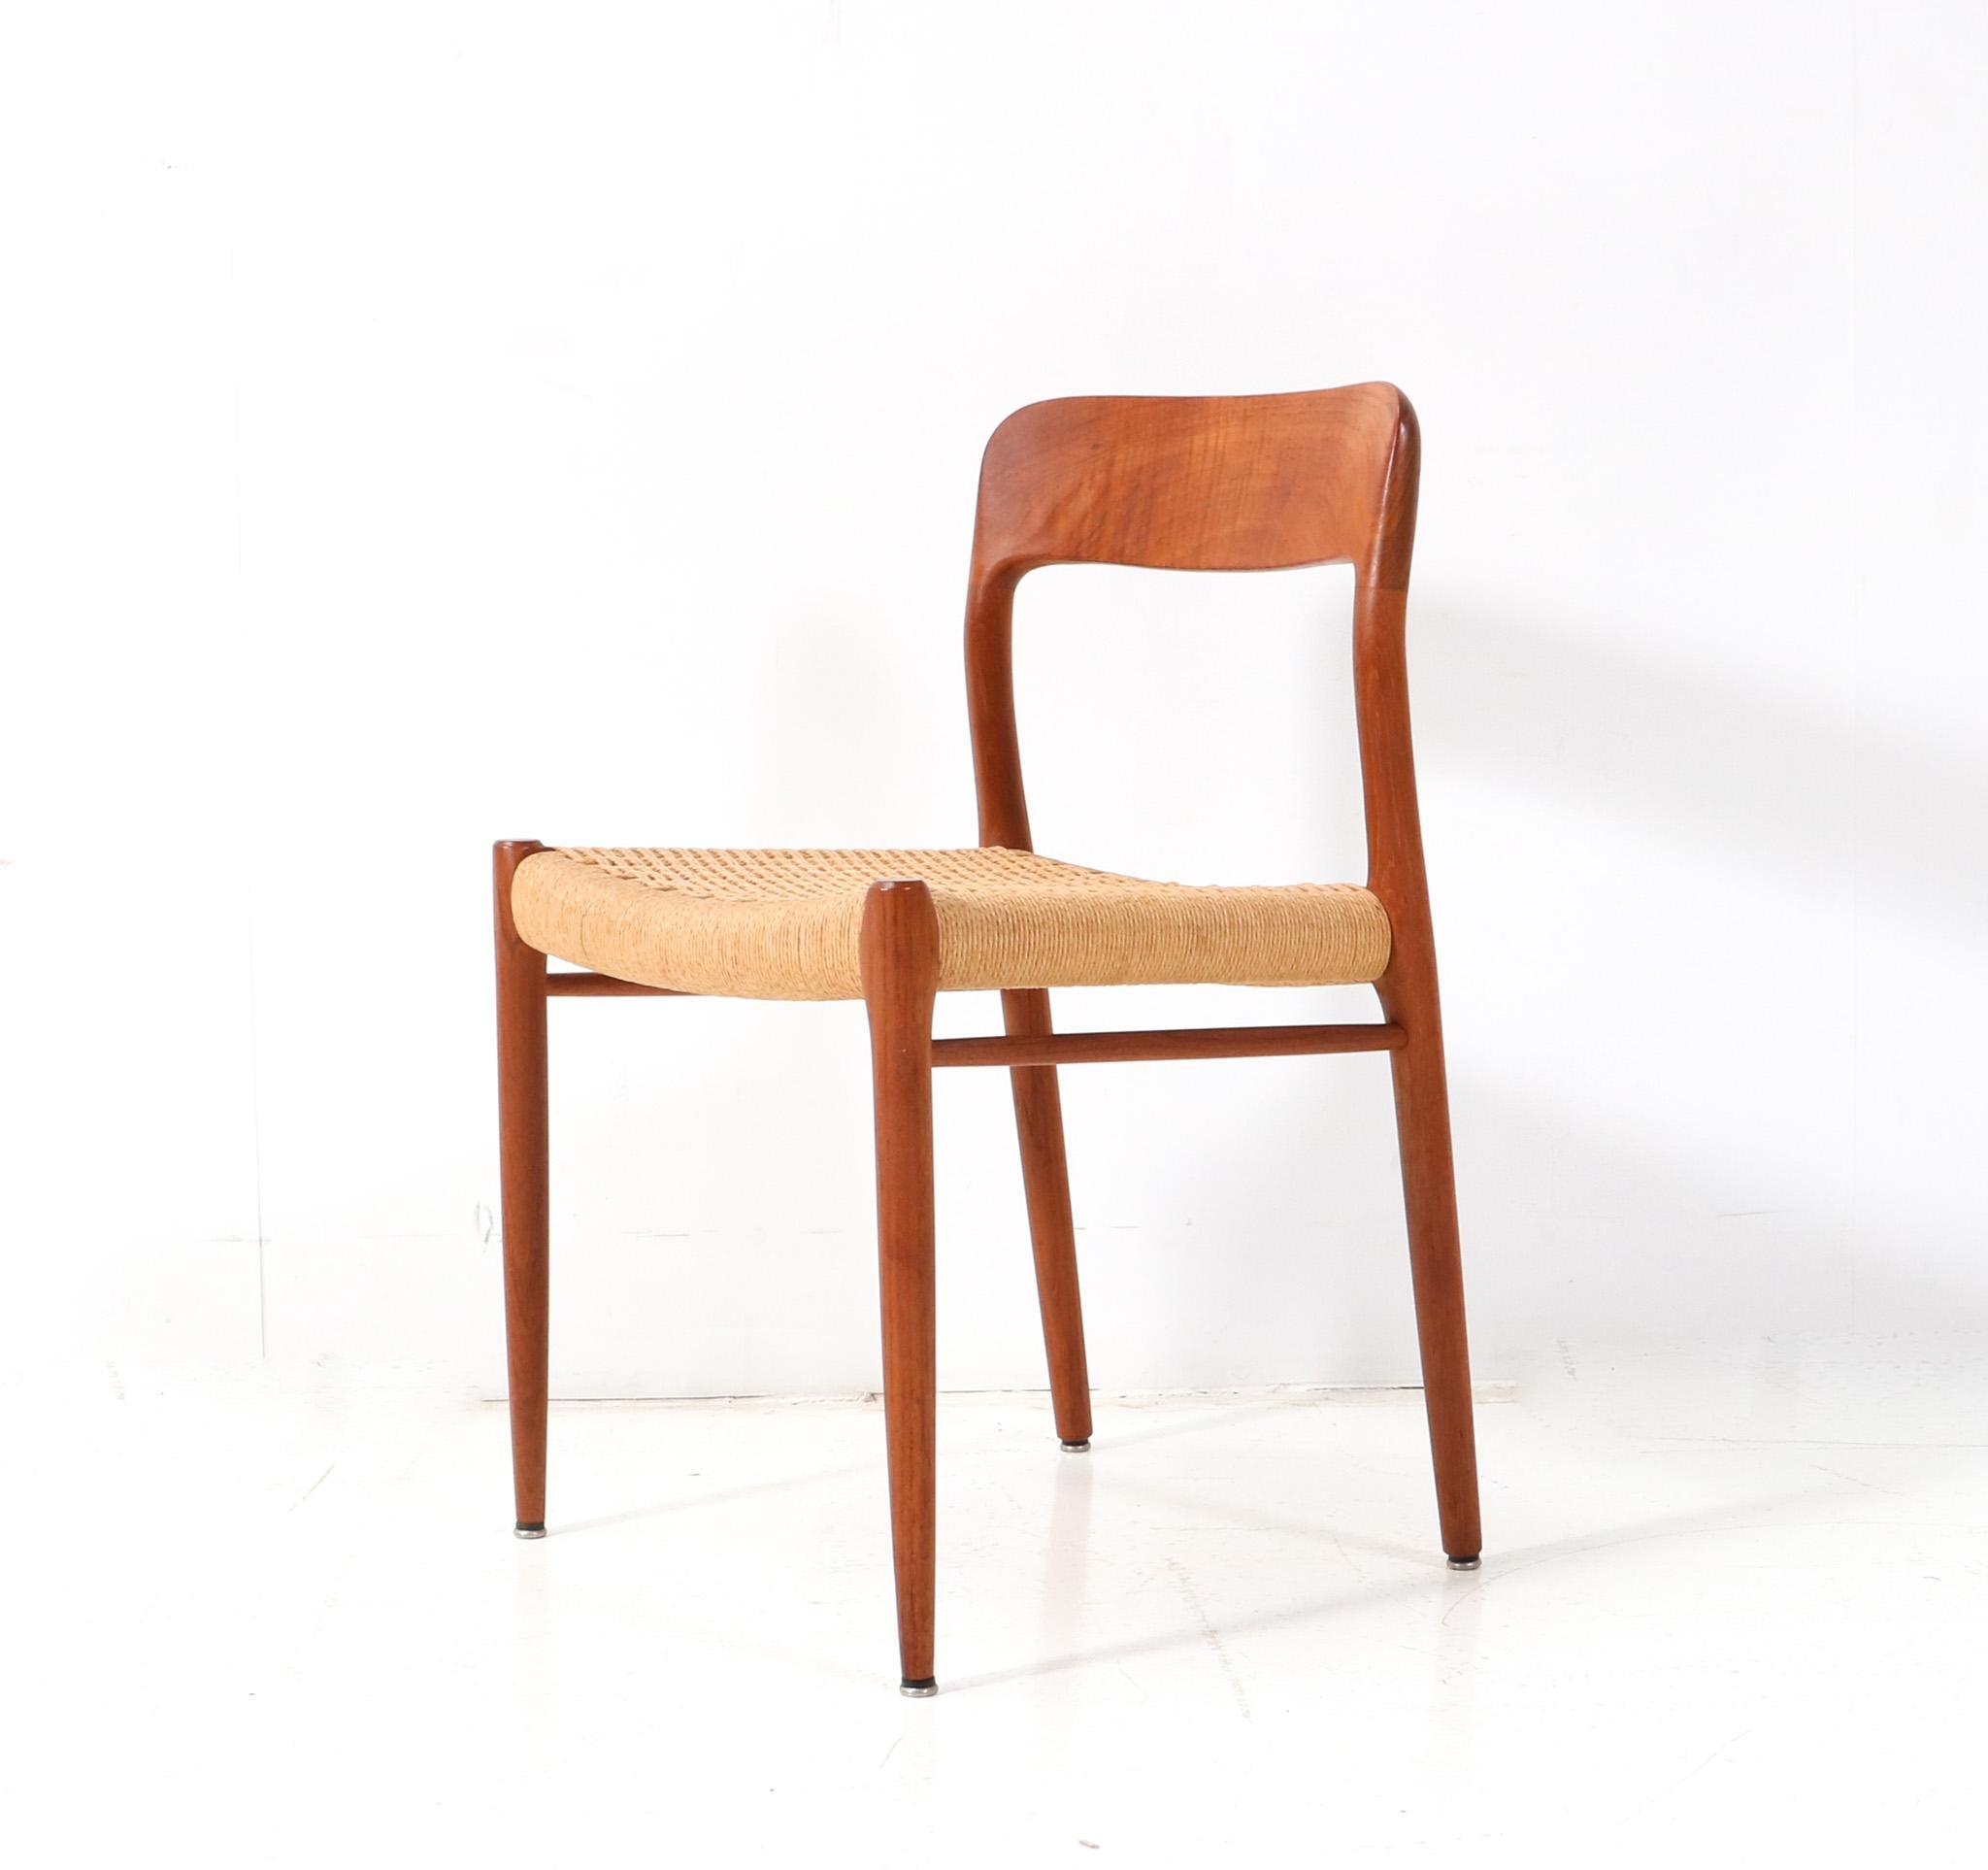 Mid-20th Century Teak Mid-Century Modern Model 75 Dining Chairs by Niels Otto Møller, 1956